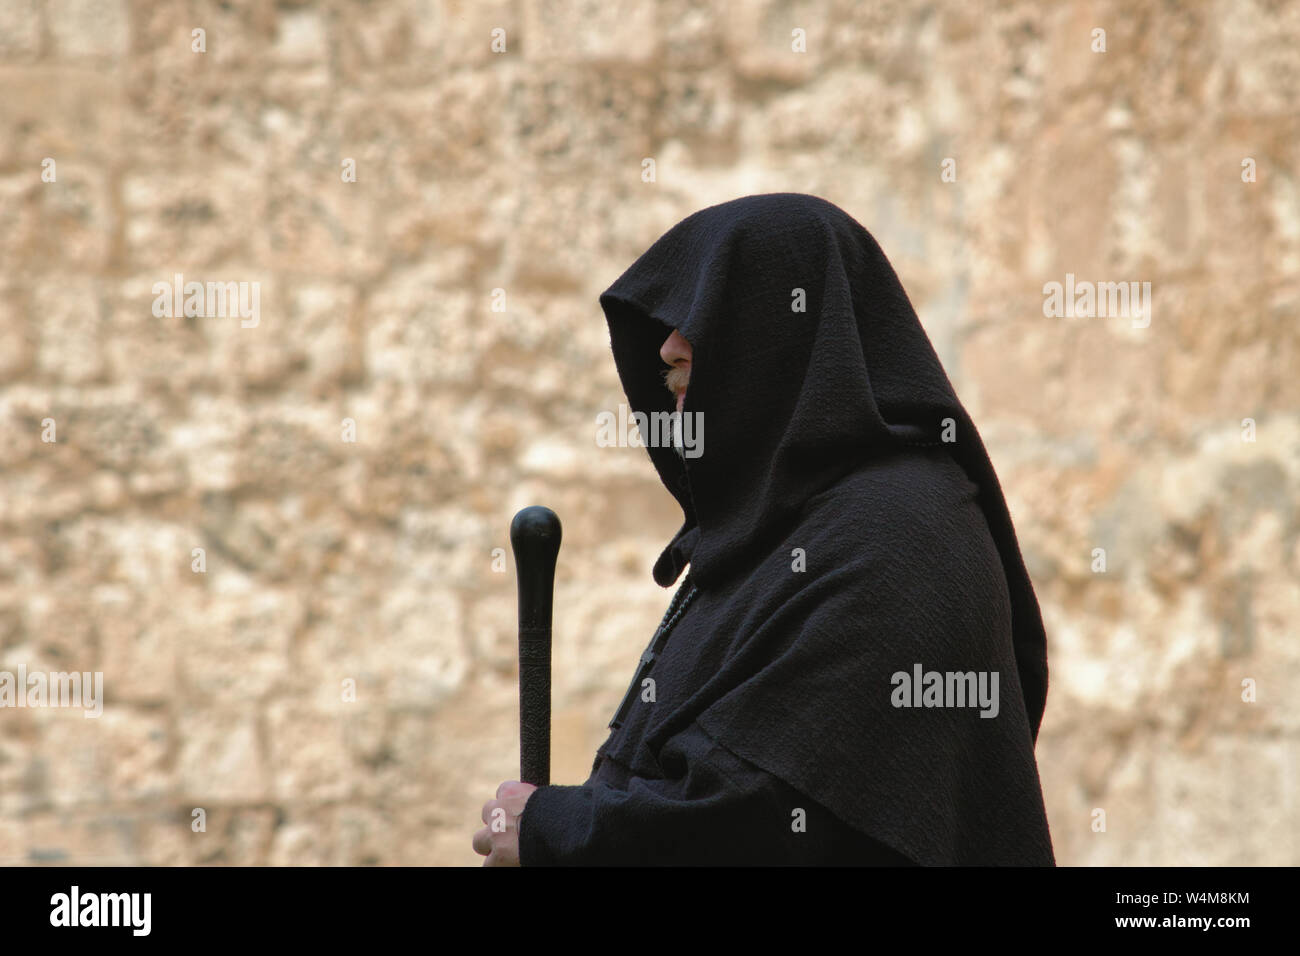 Hooded spooky looking medieval monk in a traditional black robe with staff Stock Photo